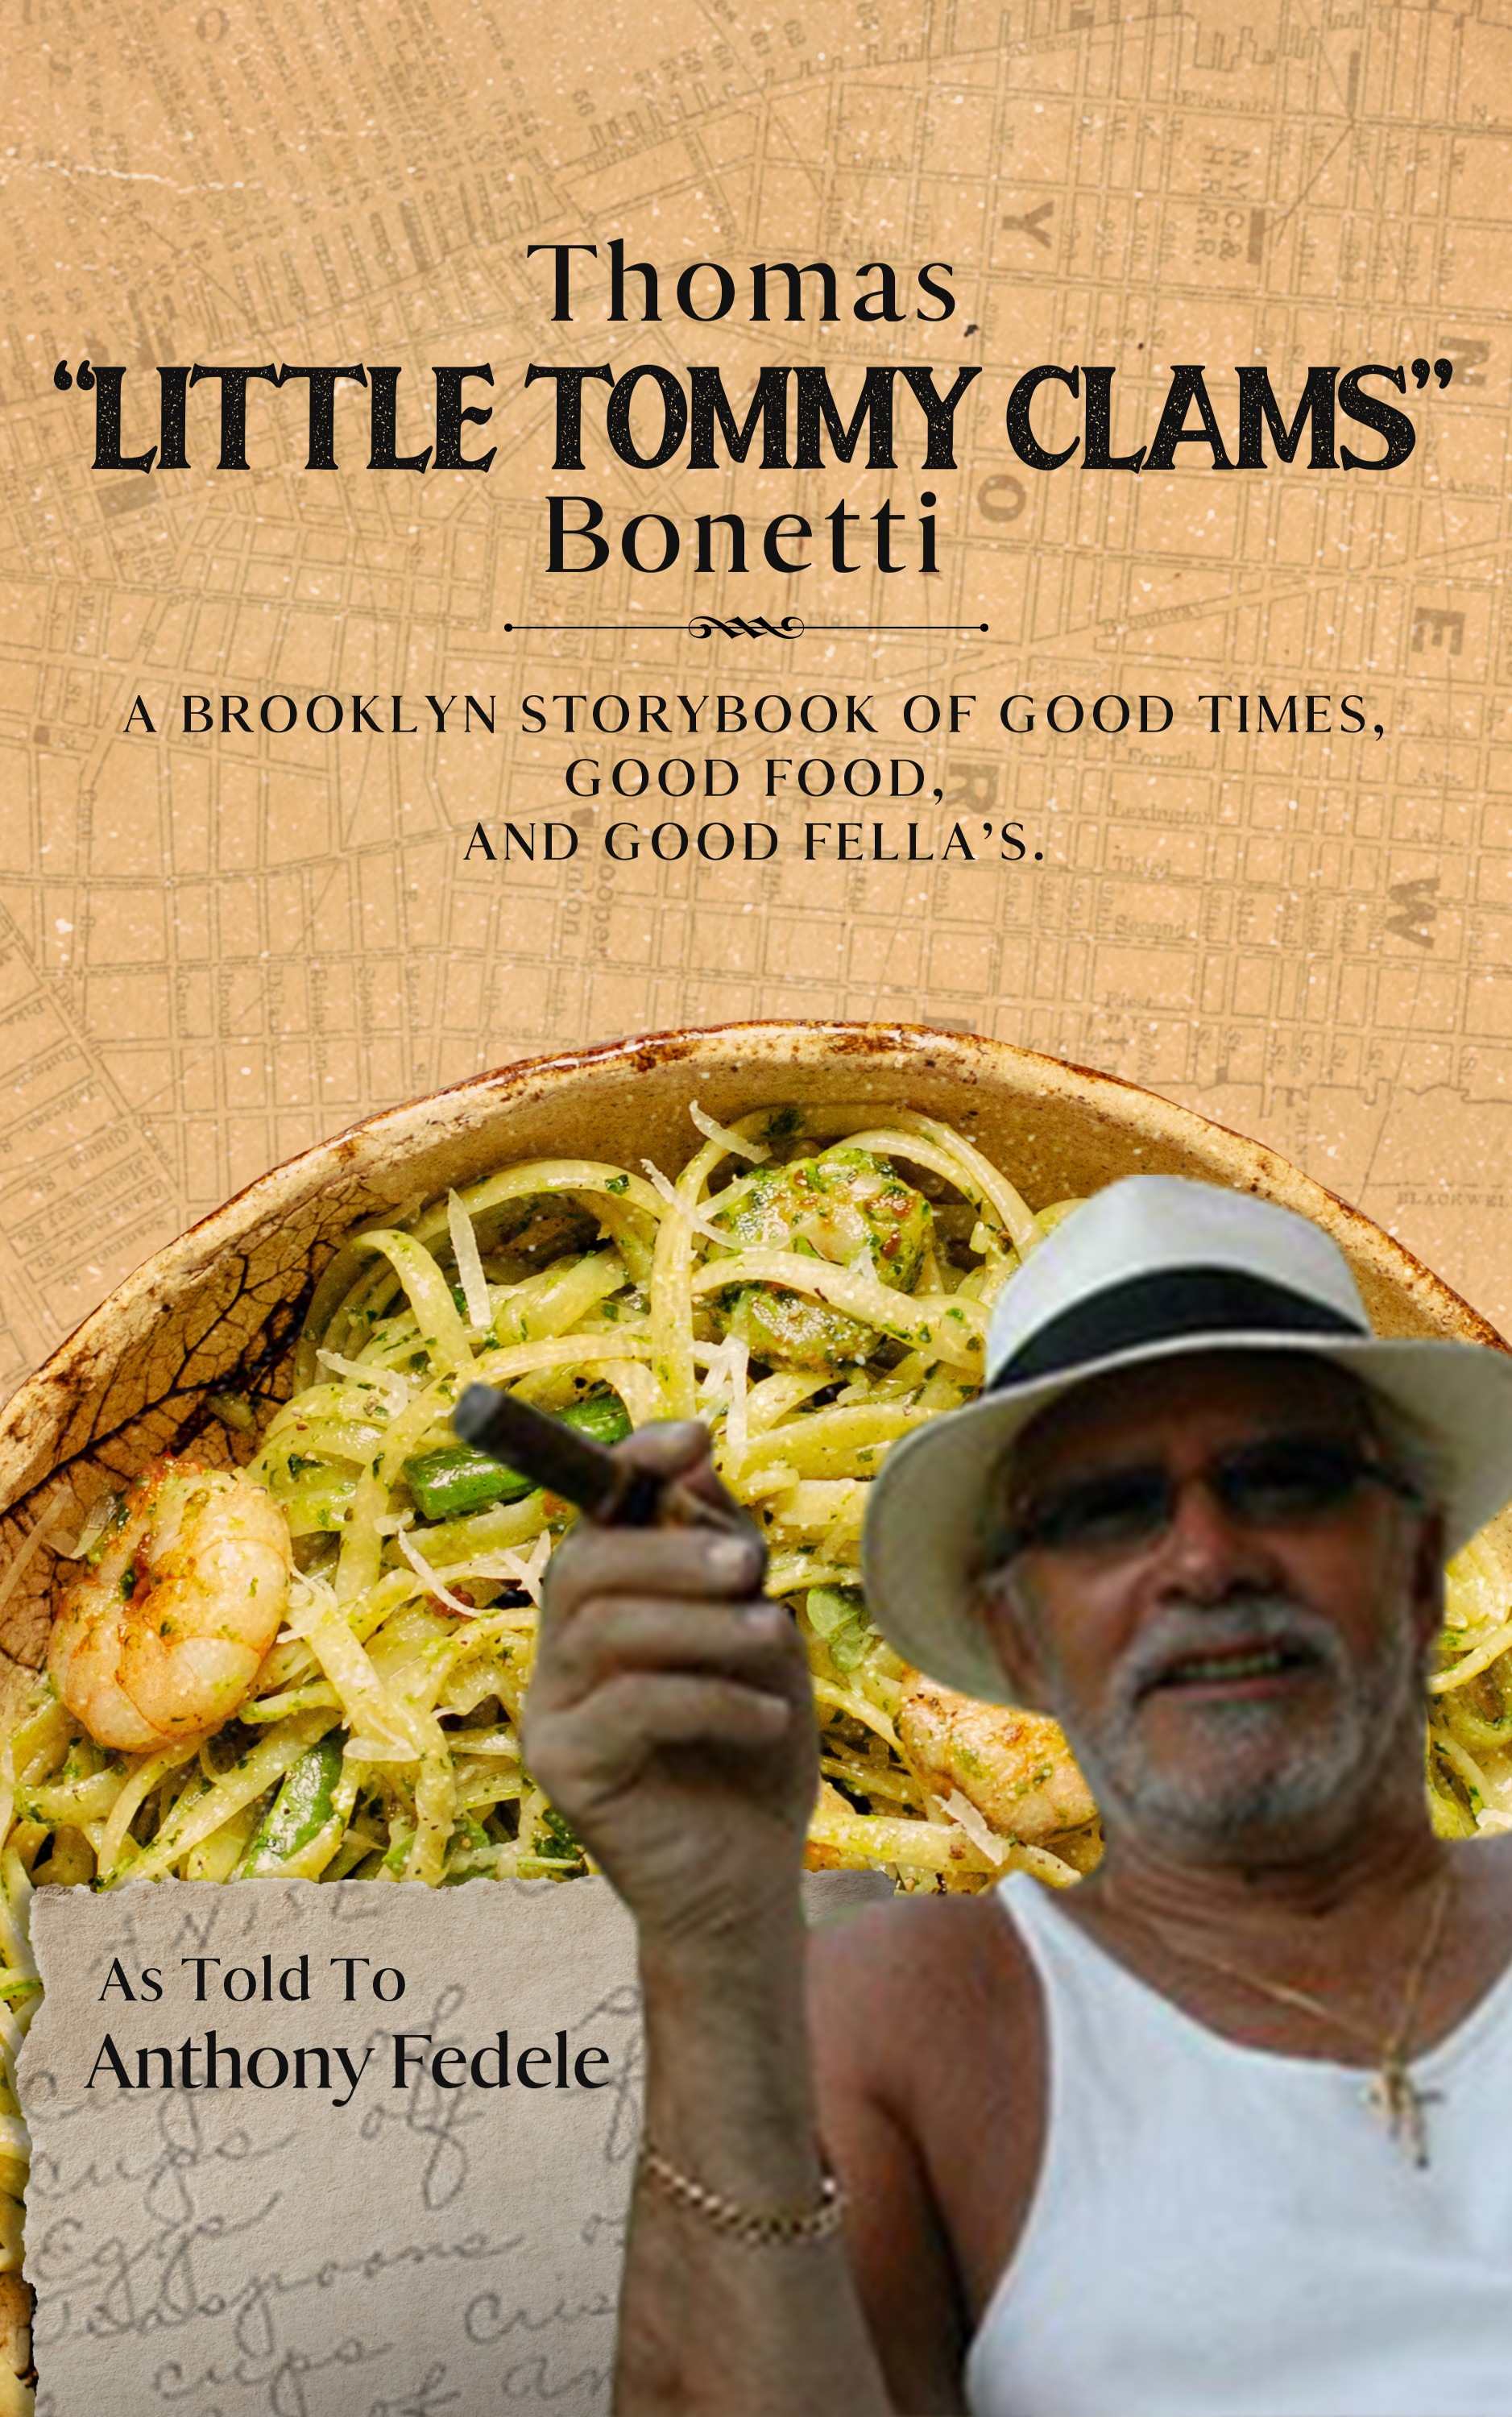 "Thomas ‘Little Tommy Clams’ Bonetti: A Brooklyn Storybook of Good Times, Good Food, and Good Fellas" by Anthony Fedele is released, a collection of tales from an Italian neighborhood and recipes